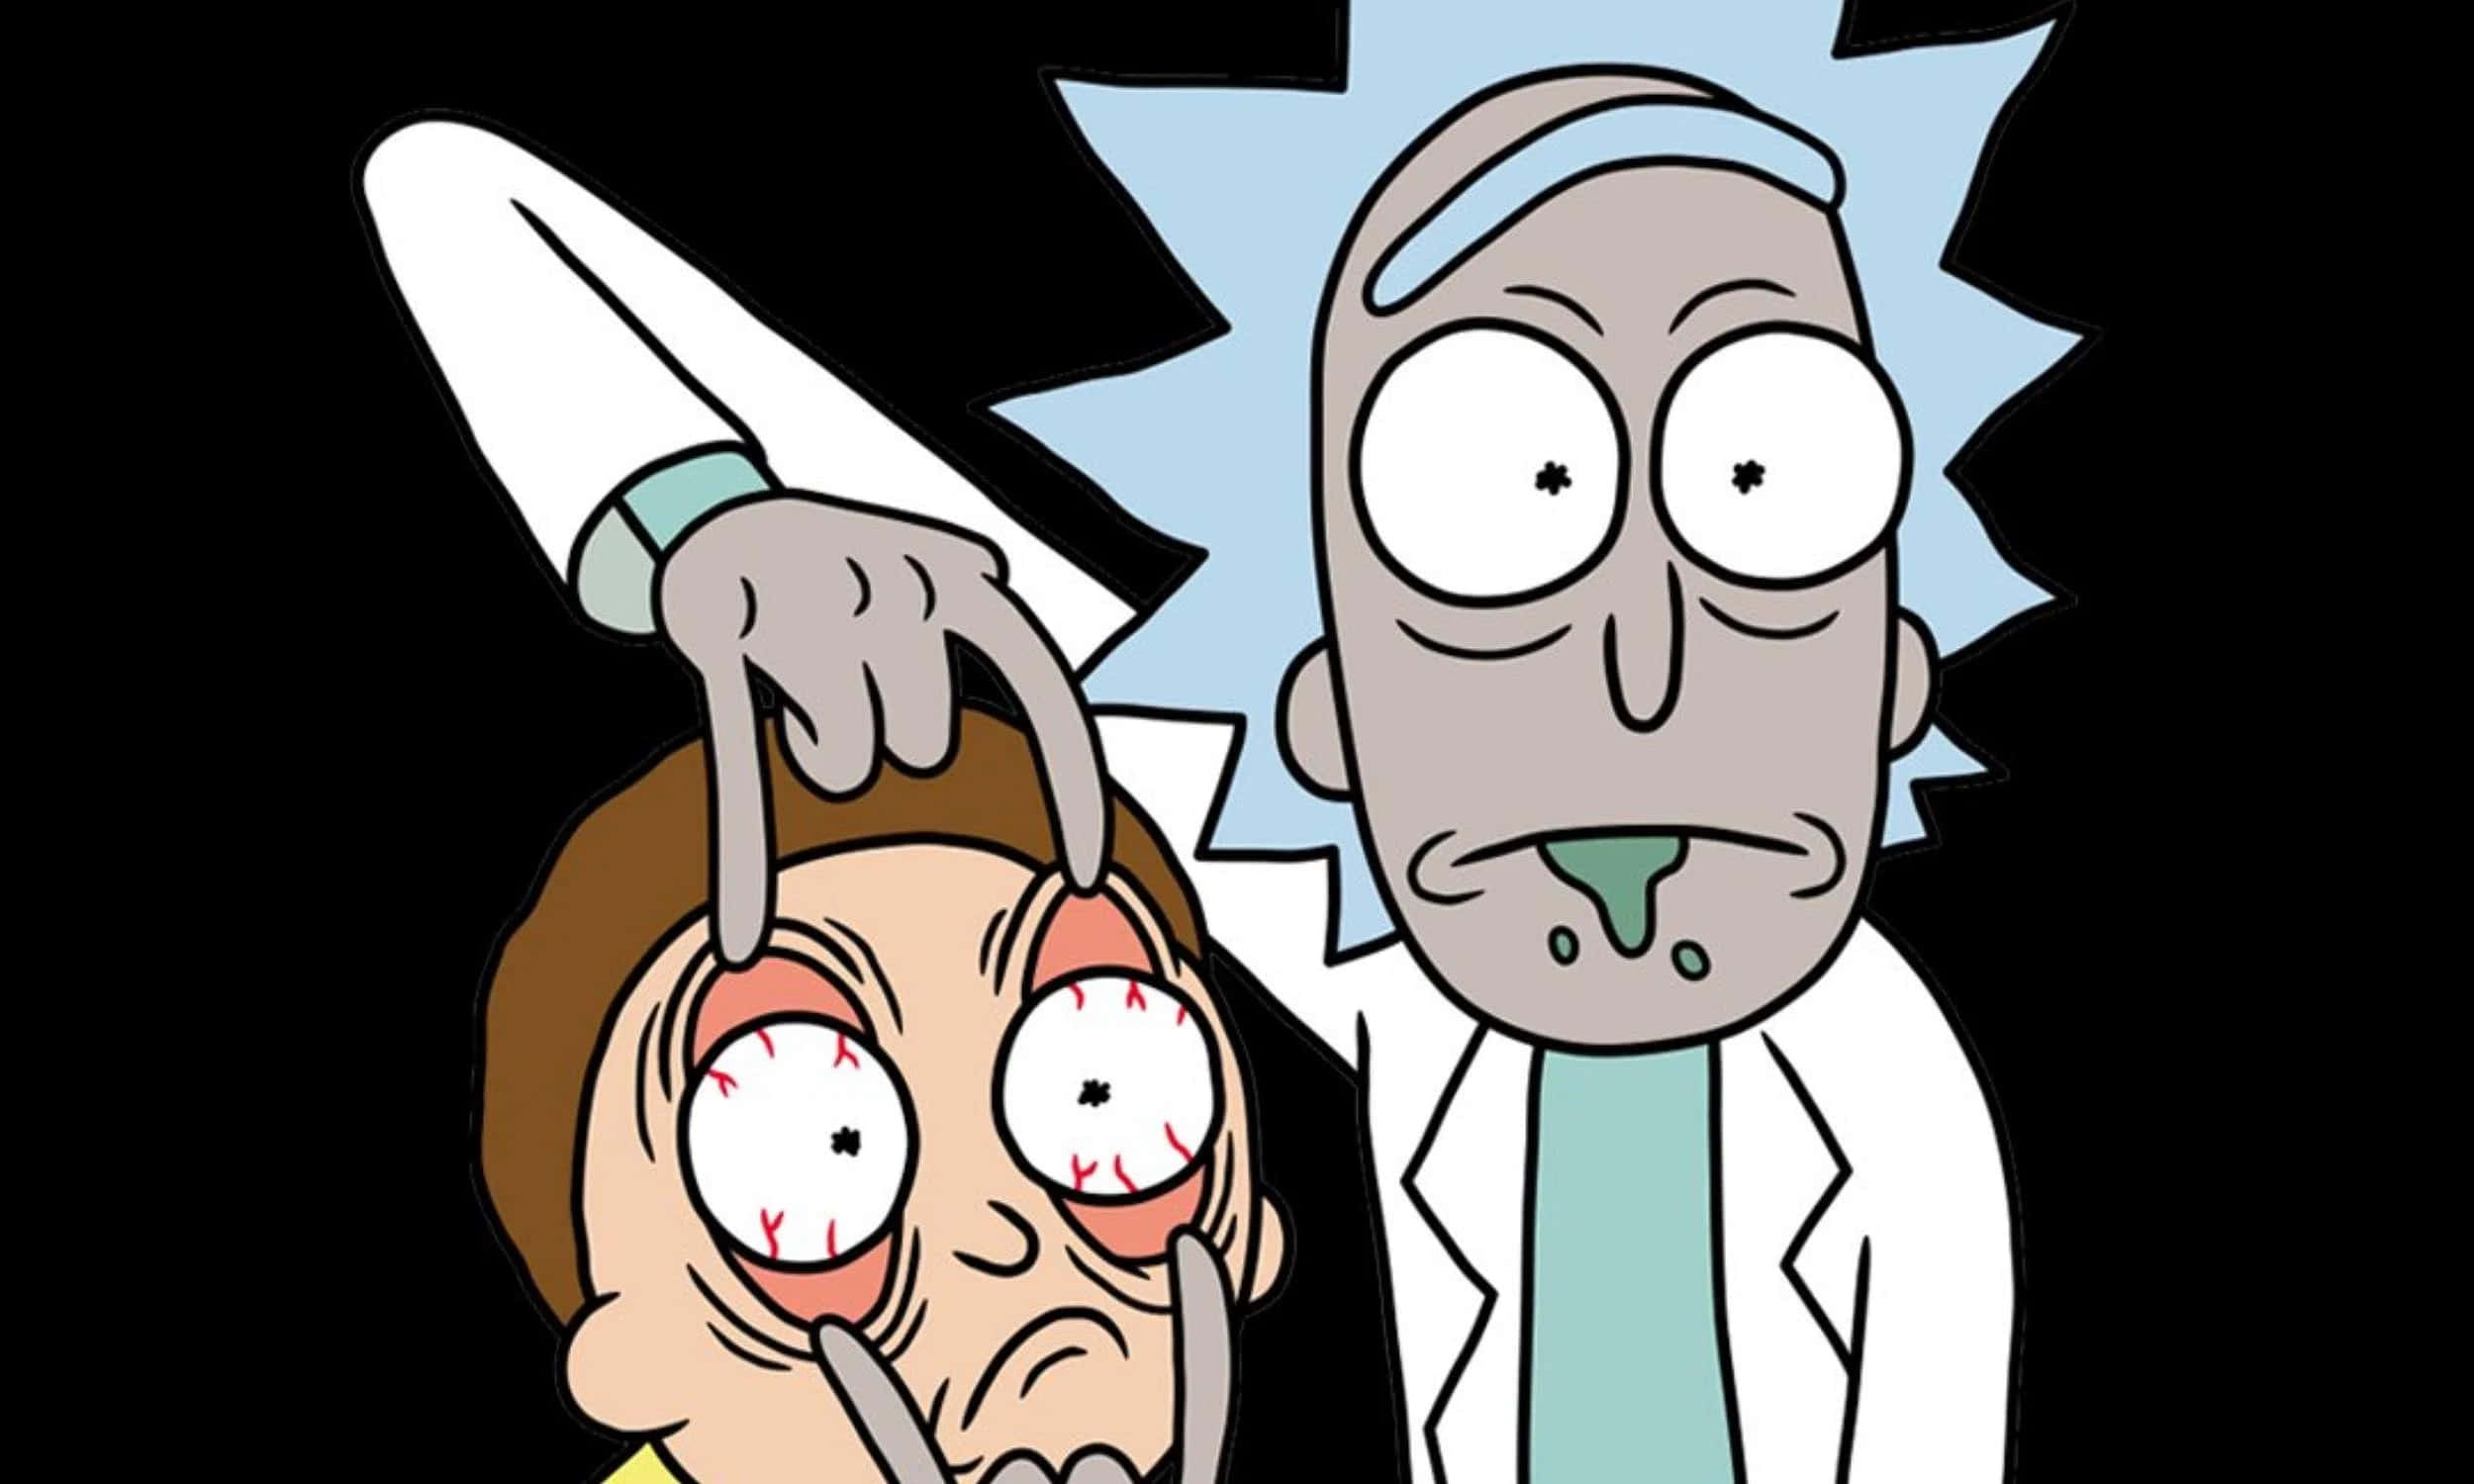 Family portrait of "Rick and Morty"